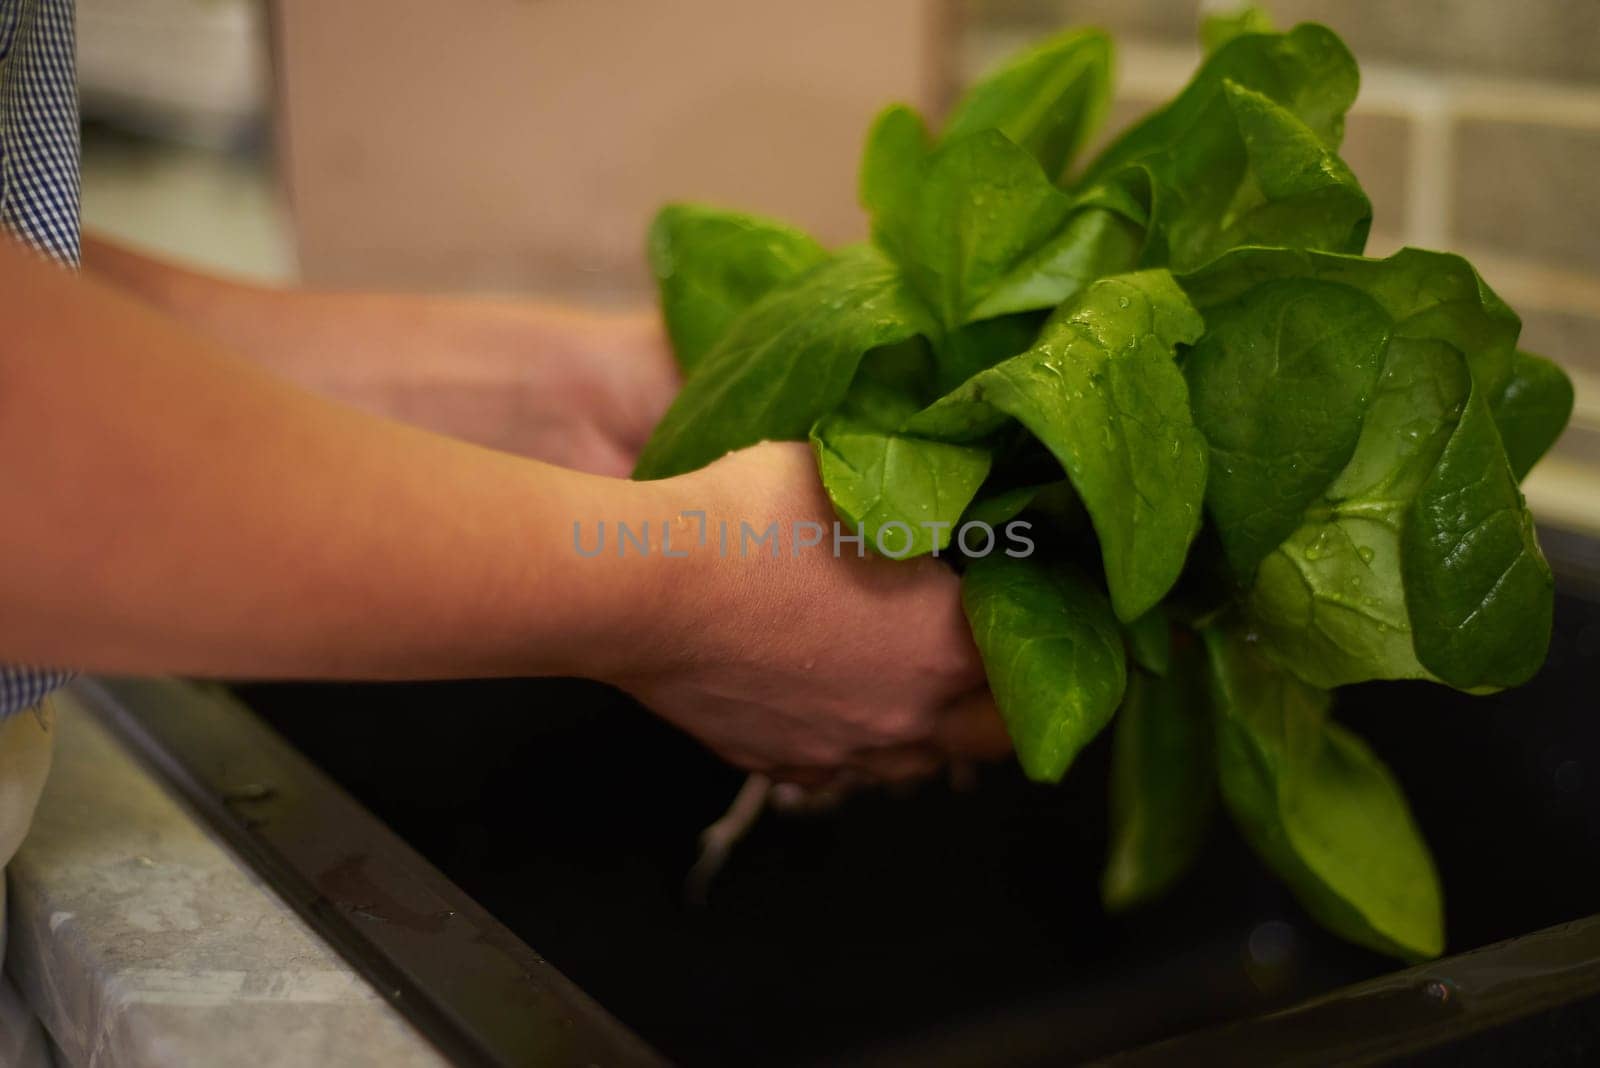 Details on the hands of unrecognizable woman housewife washing green spinach salad leaves in kitchen sink, under flowing water. Dinner at home concept. Healthy eating and dieting concept. Close-up